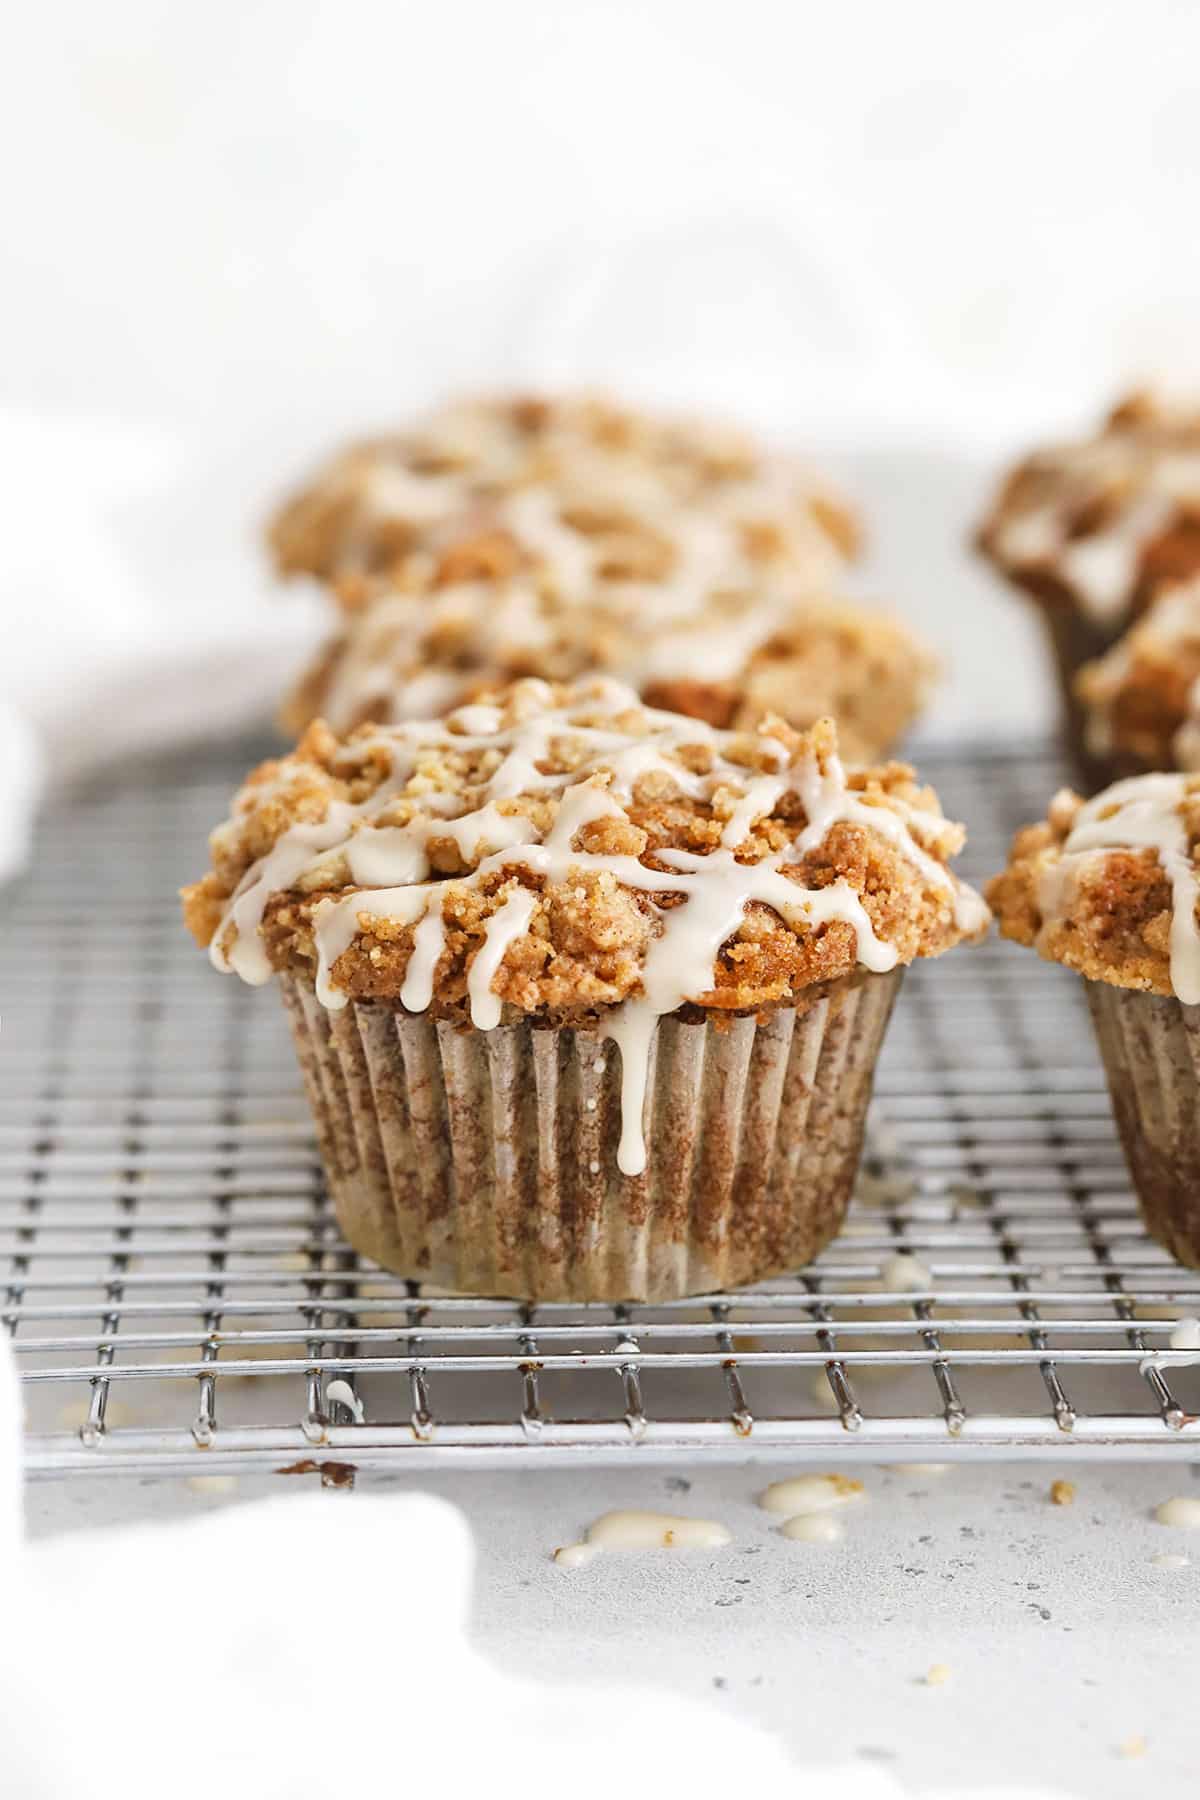 Gluten-Free Banana Crumb Muffin With cinnamon Streusel and maple glaze on a wire rack